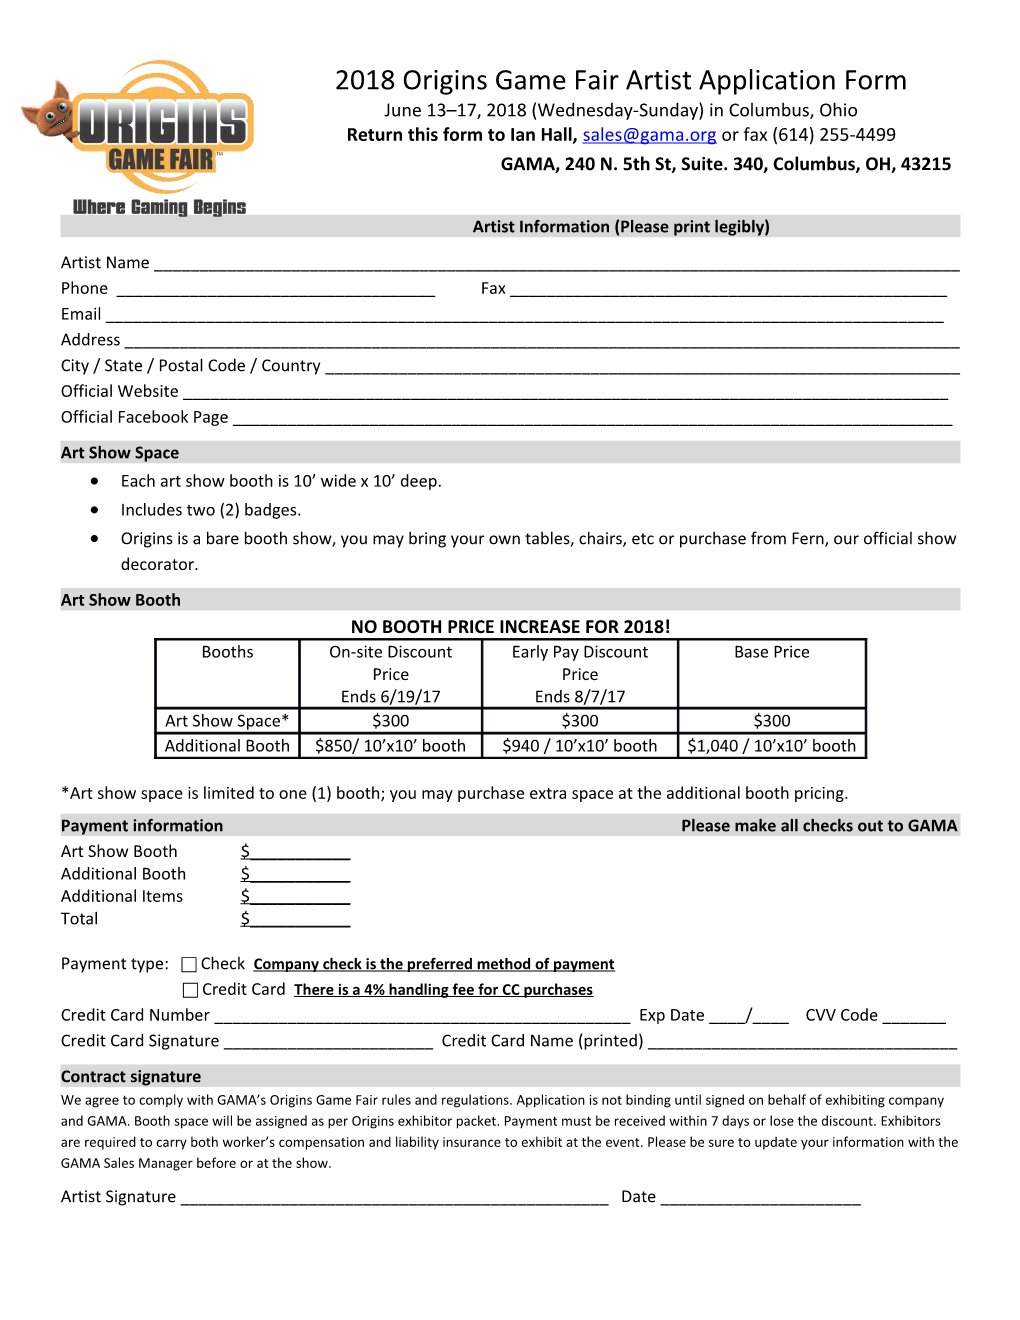 Return This Form to Ian Hall, Or Fax (614) 255-4499